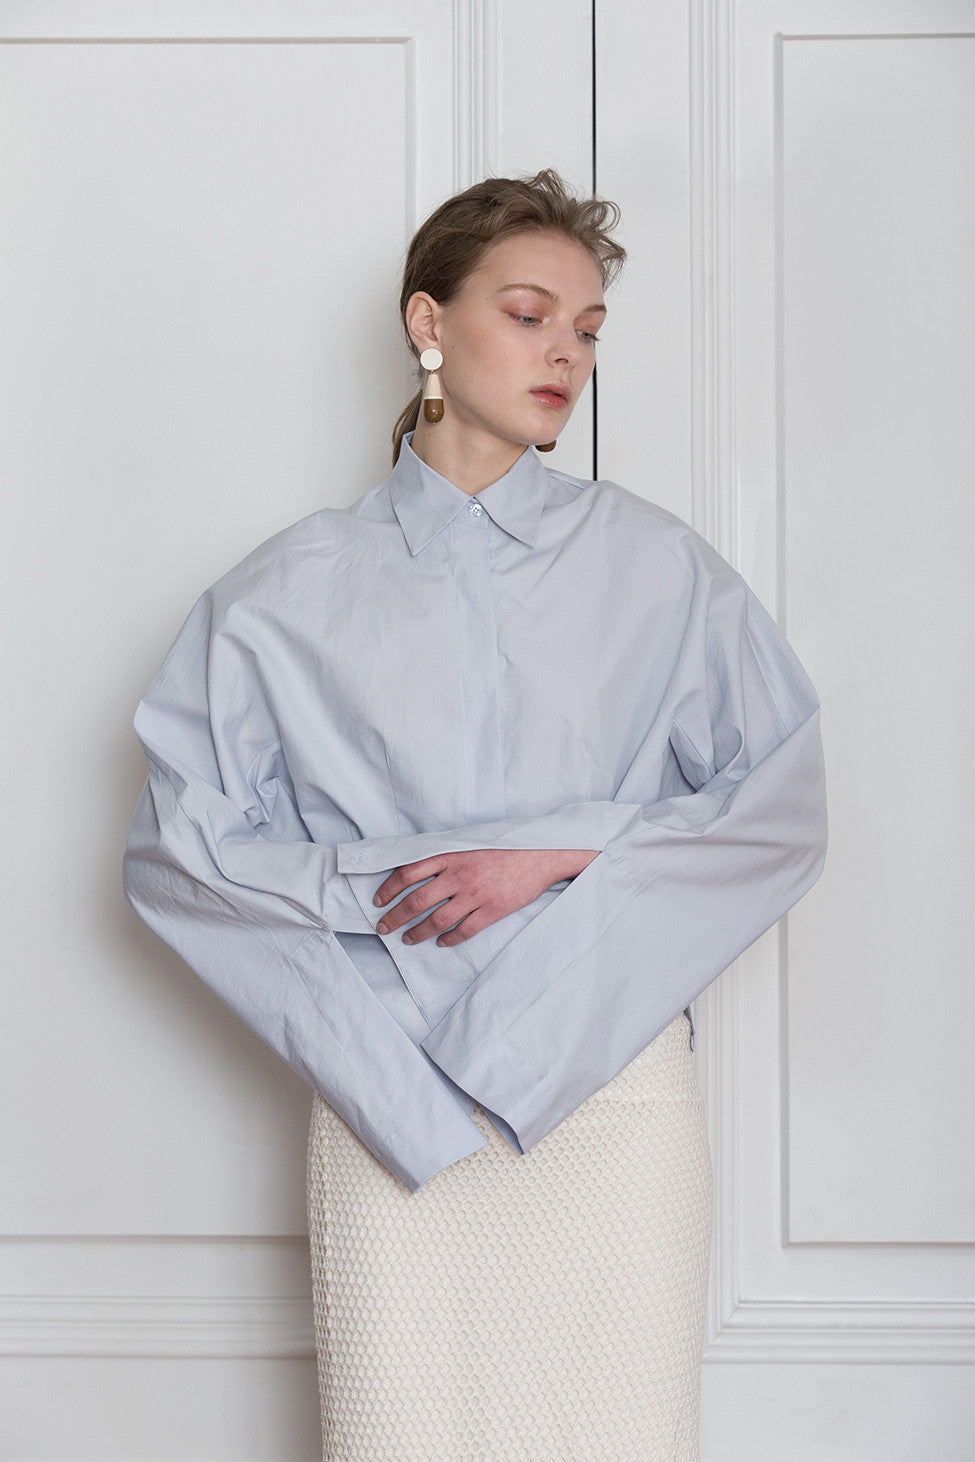 The Selina Shirt in Blue featuring classic button down with full length wide sleeves. Button closure at cuffs. Dropped Shoulder.